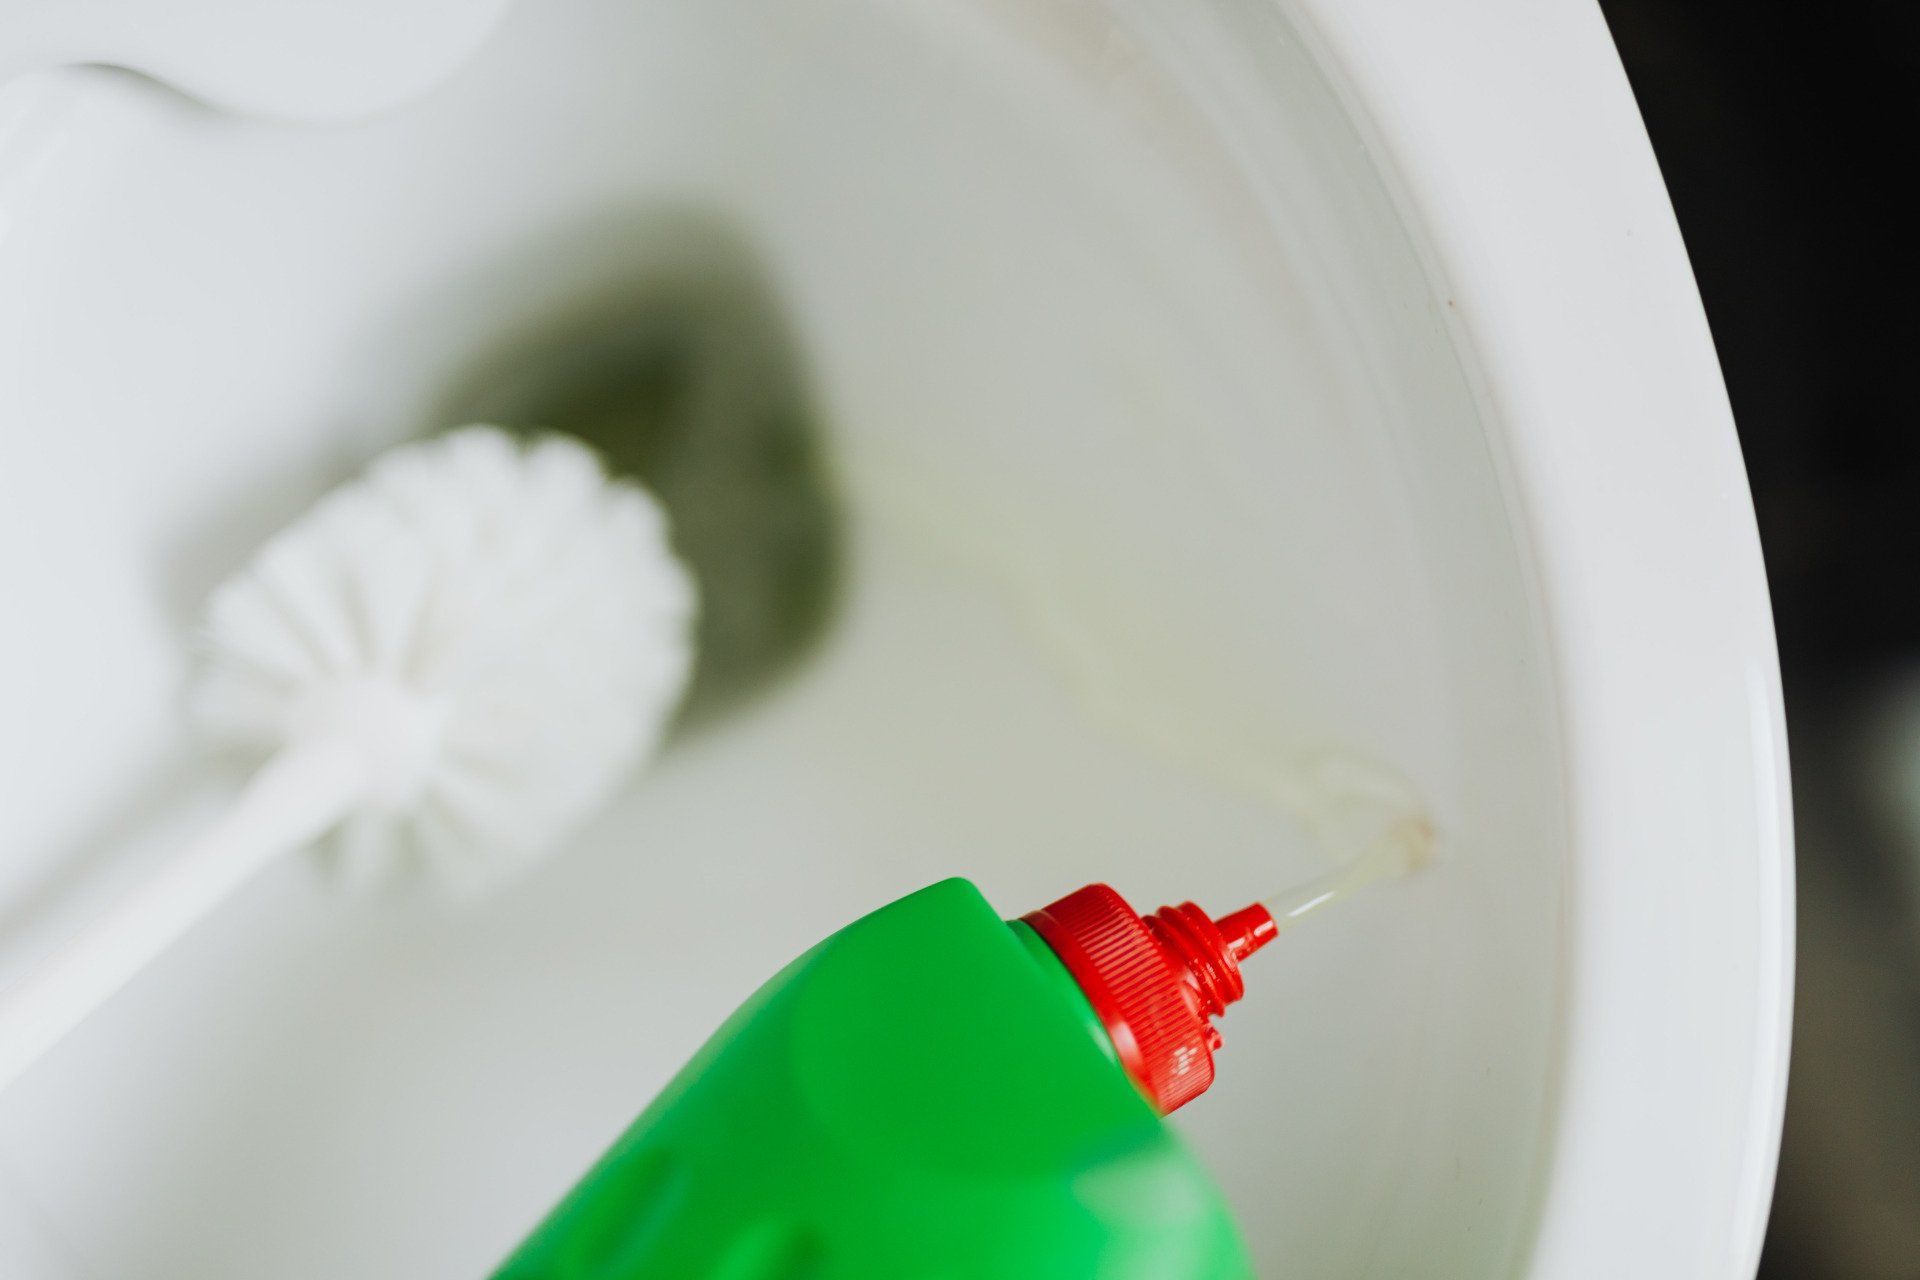 Bathroom toilet being scrubbed with green cleaning solutions